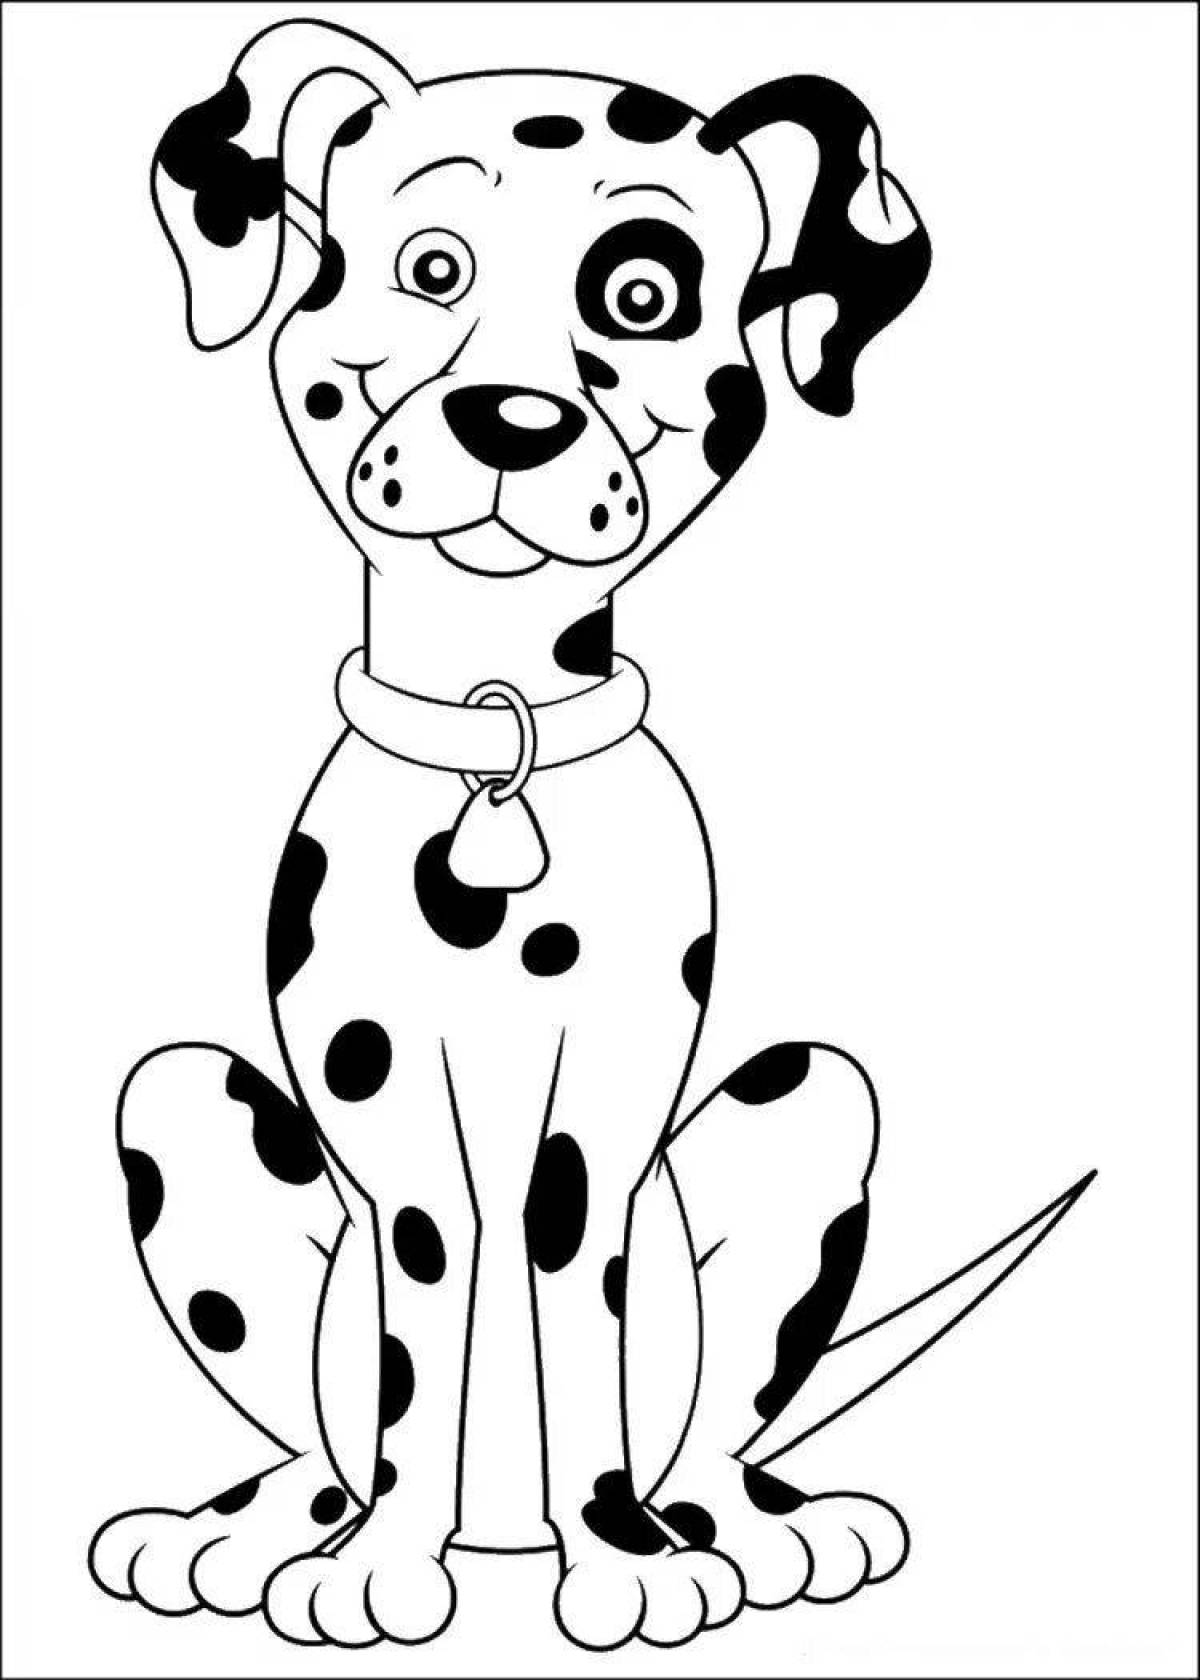 Coloring page of an attractive Dalmatian dog